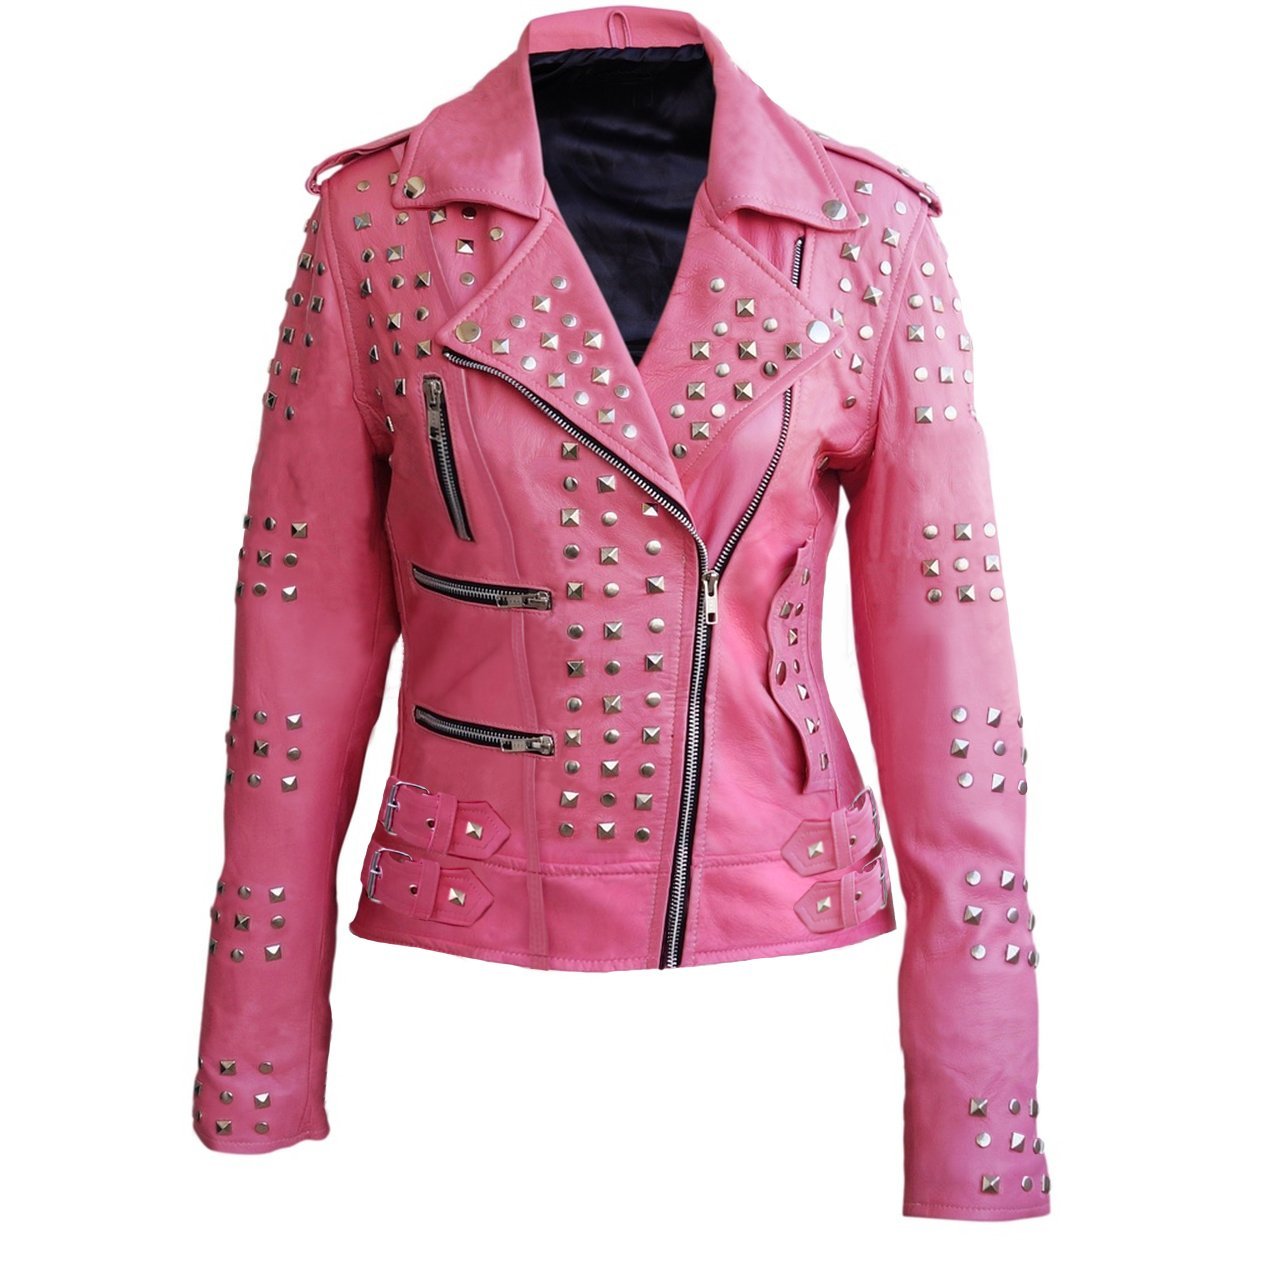 Buy Red Leather Jacket Plus Size